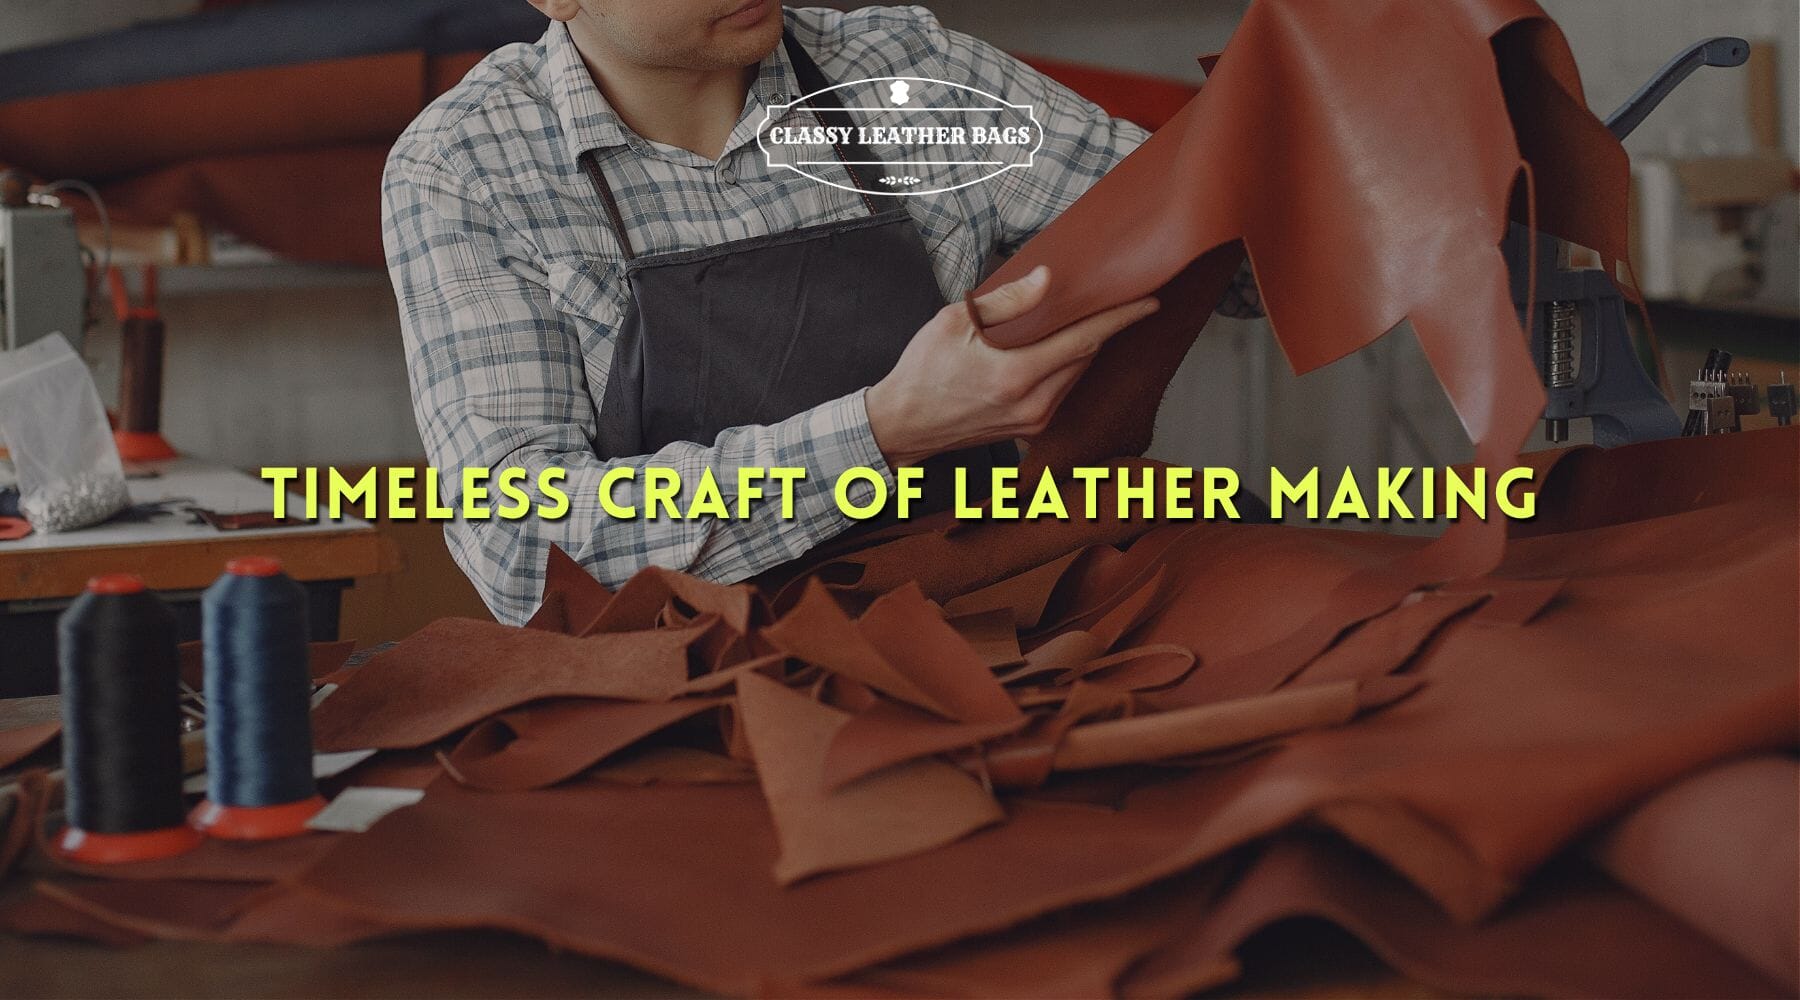 The Timeless Craft Of Leather Making